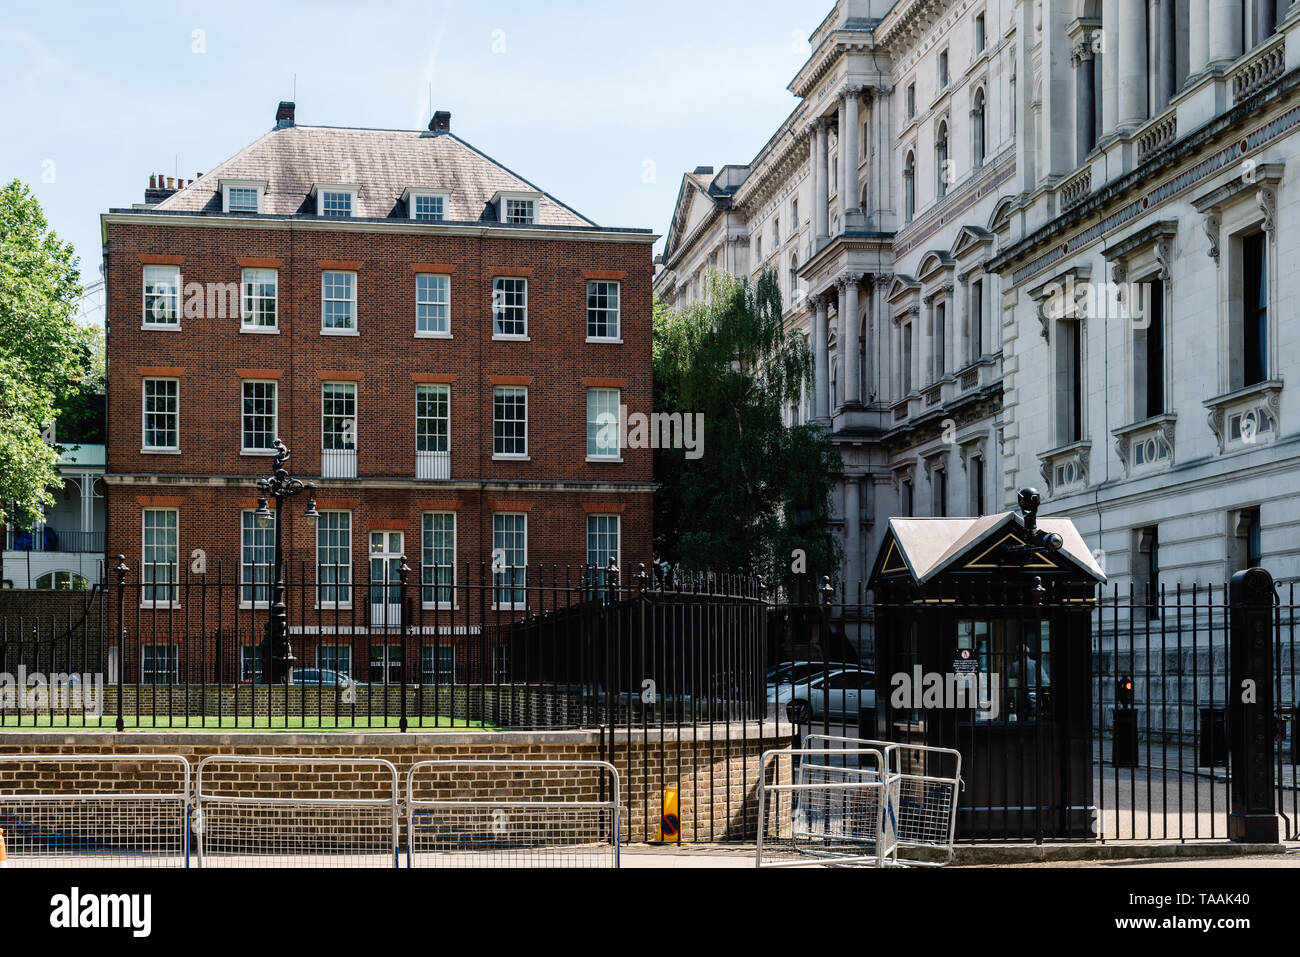 London, UK - May 14, 2019:  Back entrance gate to 10 Downing Street in the City of Westminster, London, UK. 10 of Downing Street is the residence of t Stock Photo